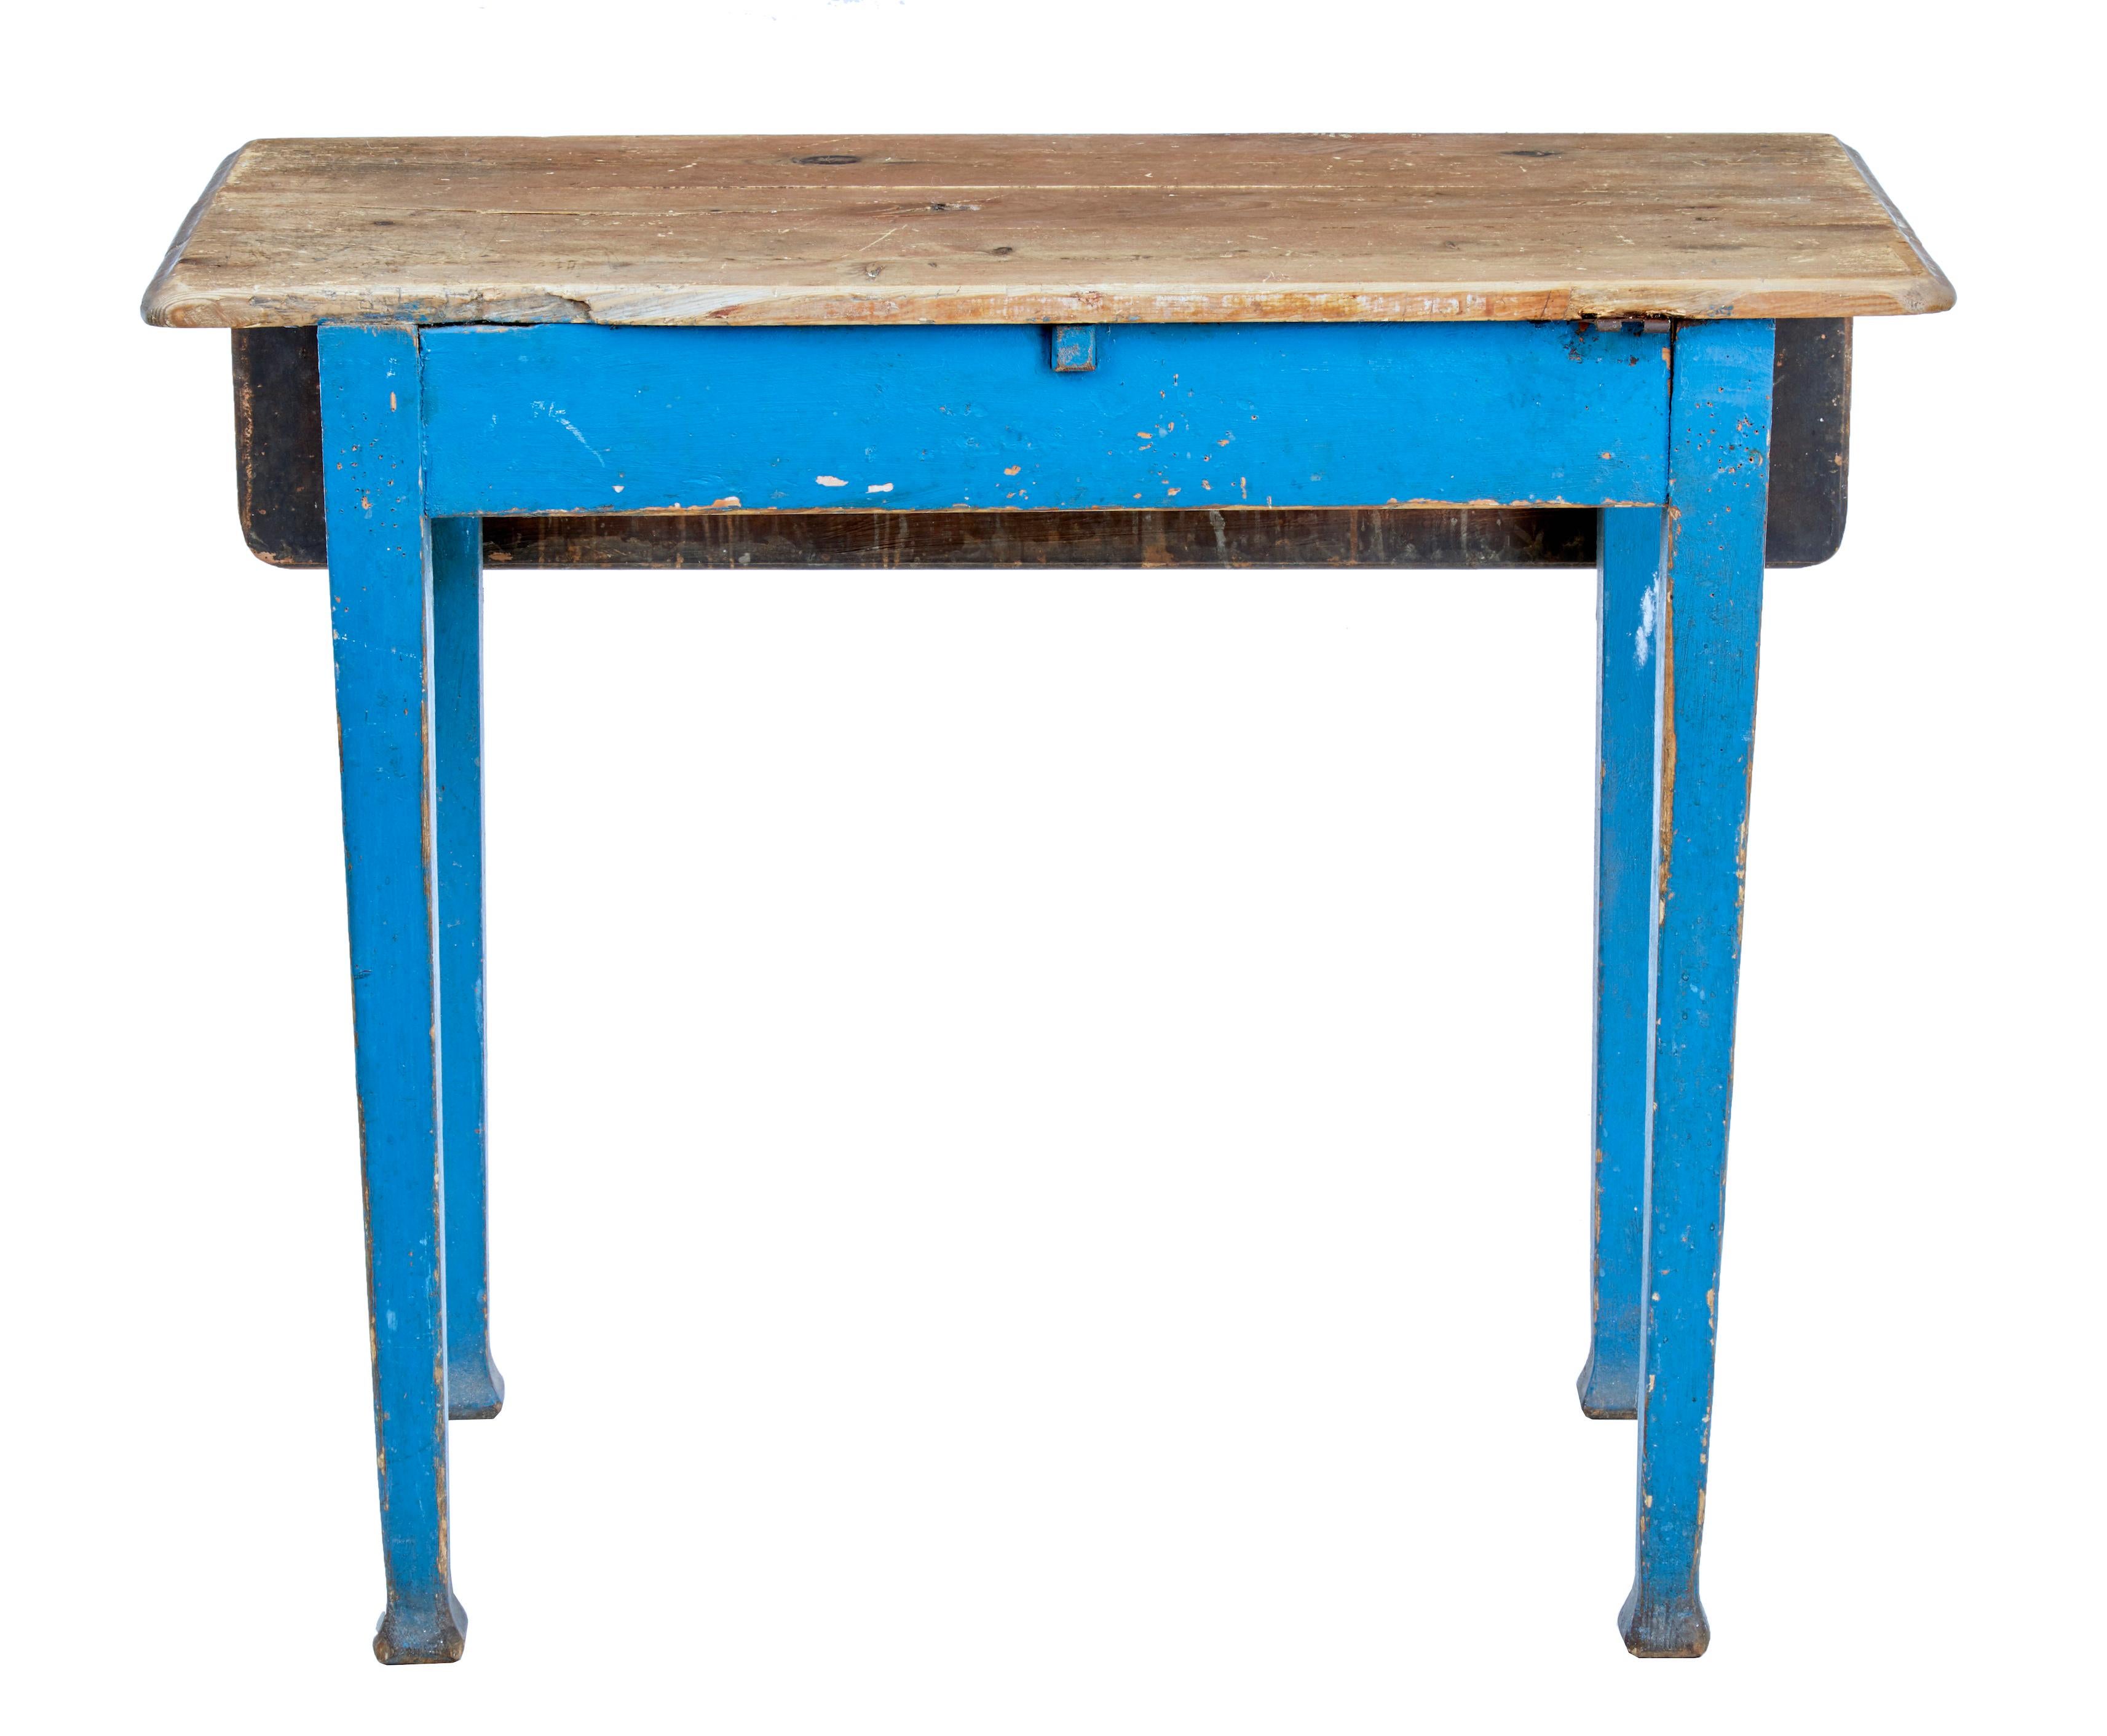 Hand-Painted 19th Century Rustic Swedish Painted Pine Drop-Leaf Table